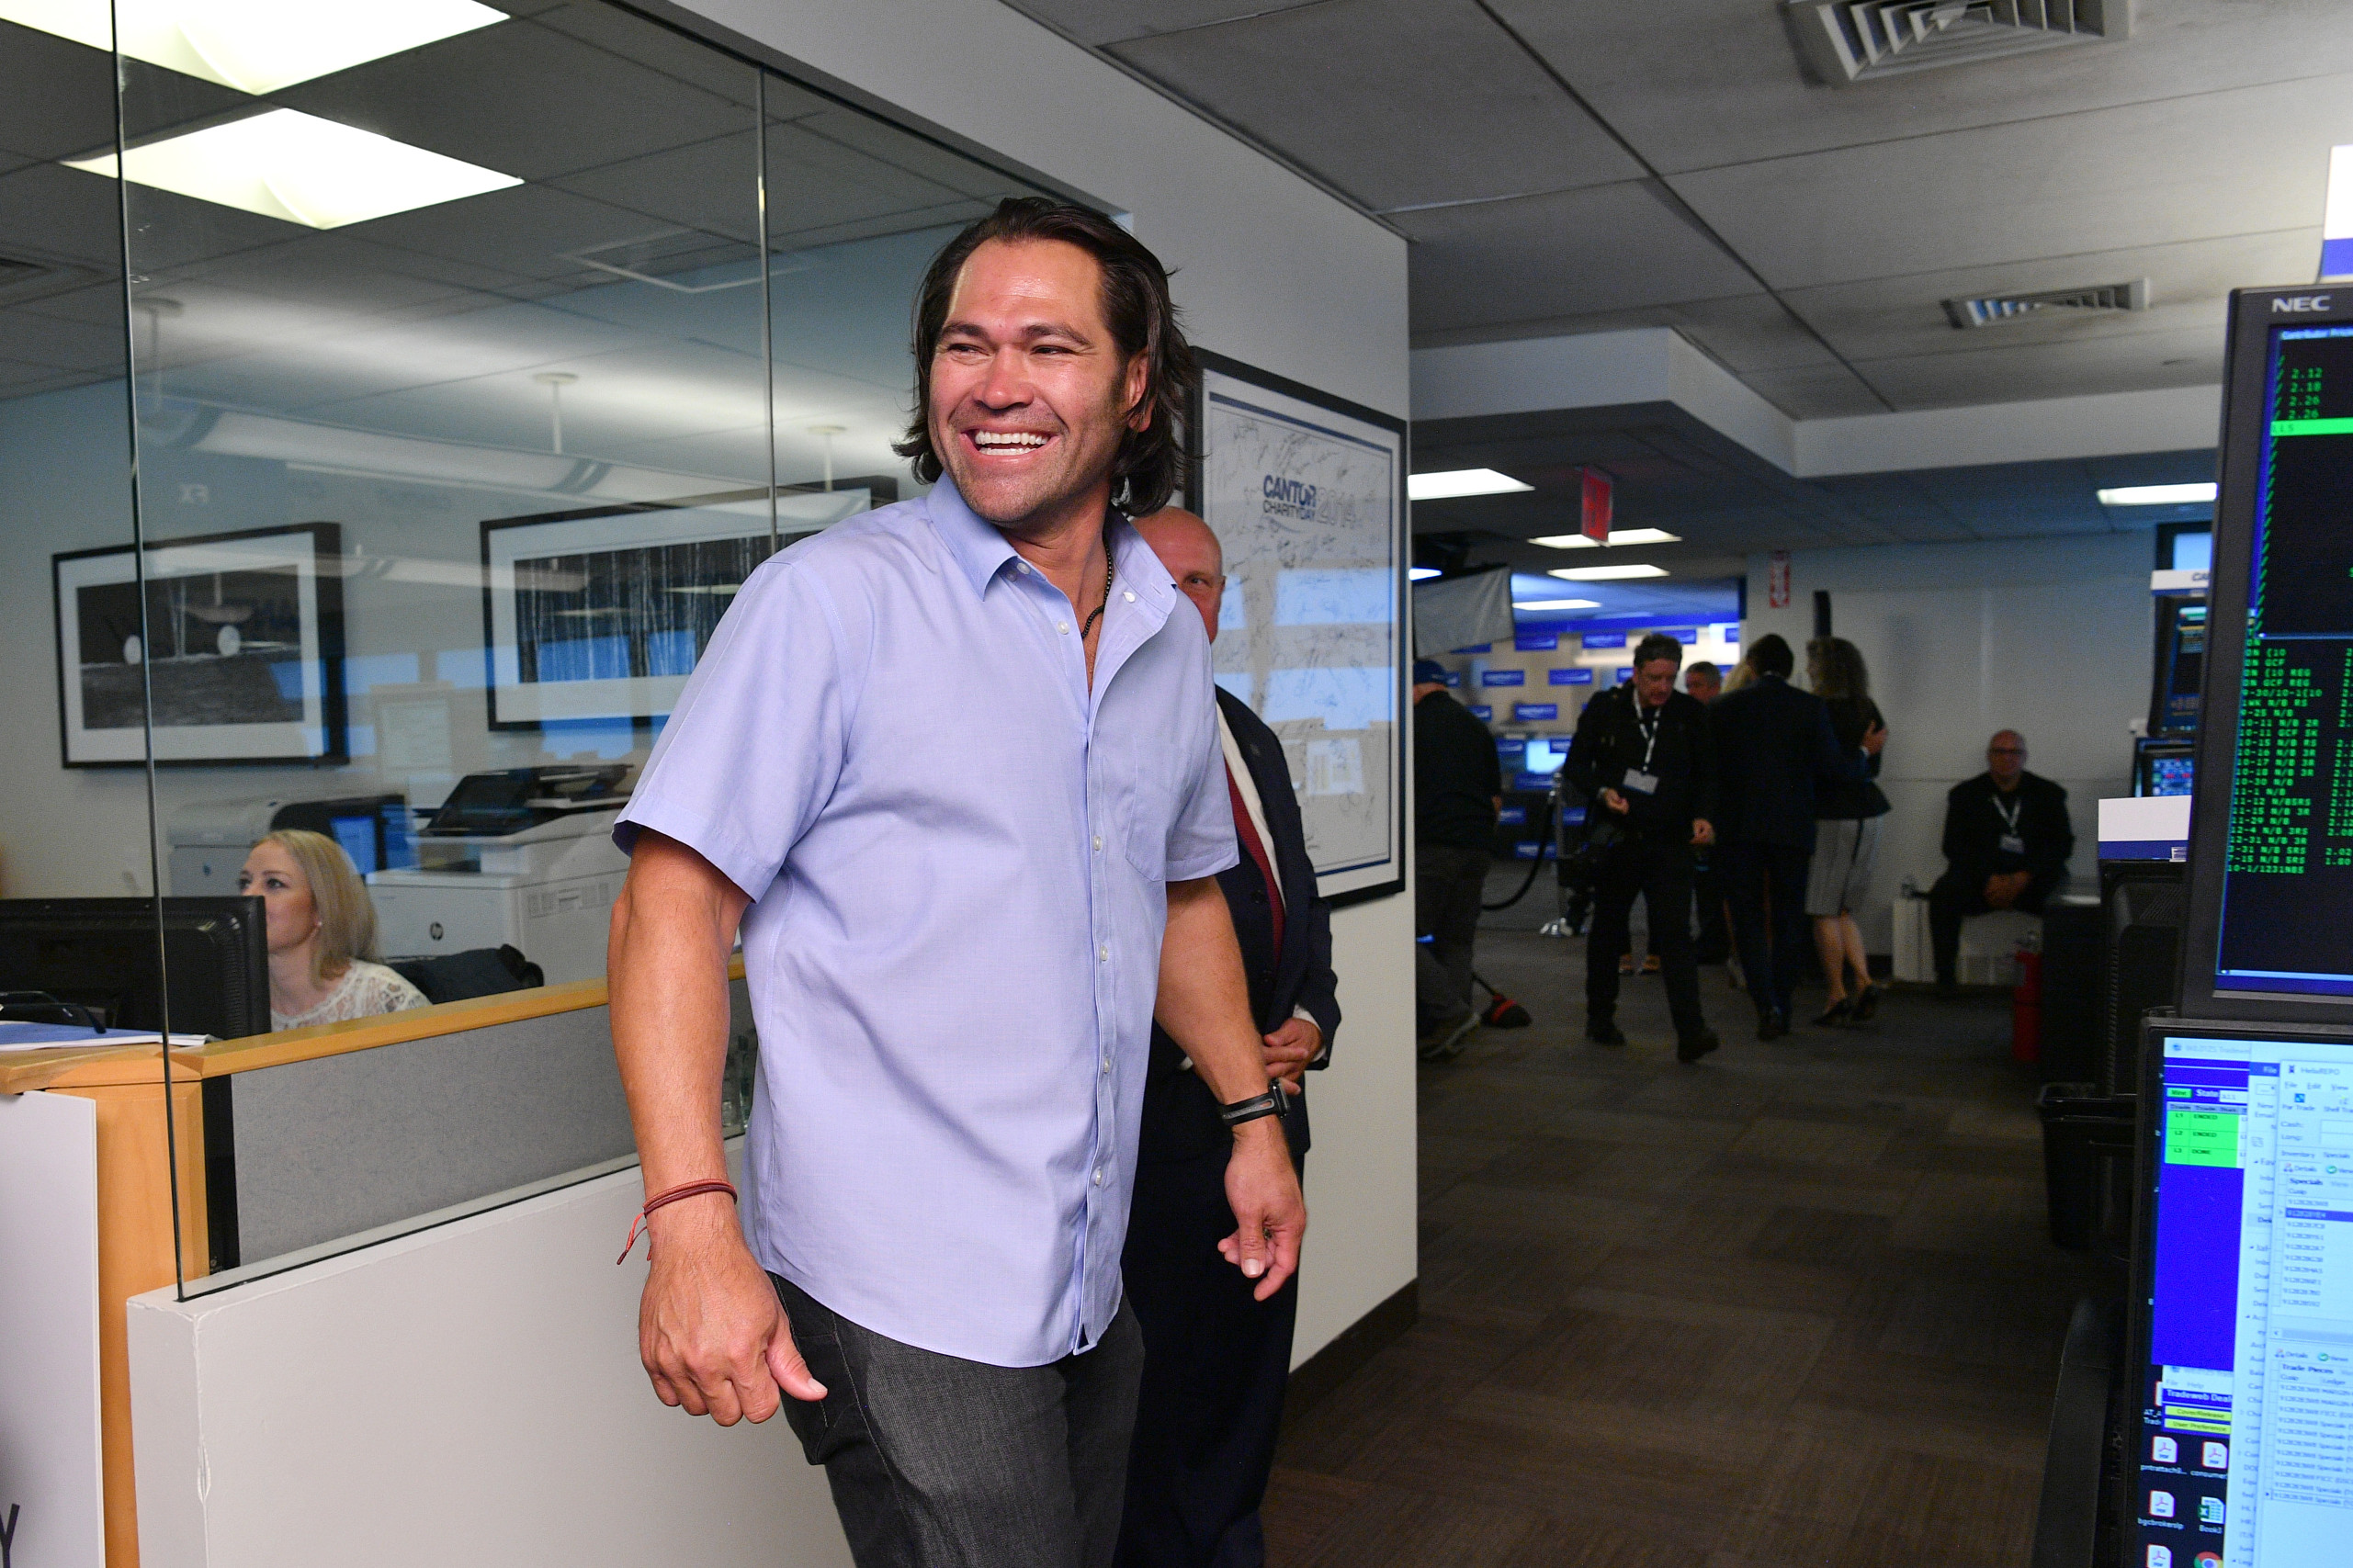 Retired MLB All-Star Johnny Damon, 47, arrested for DUI as his